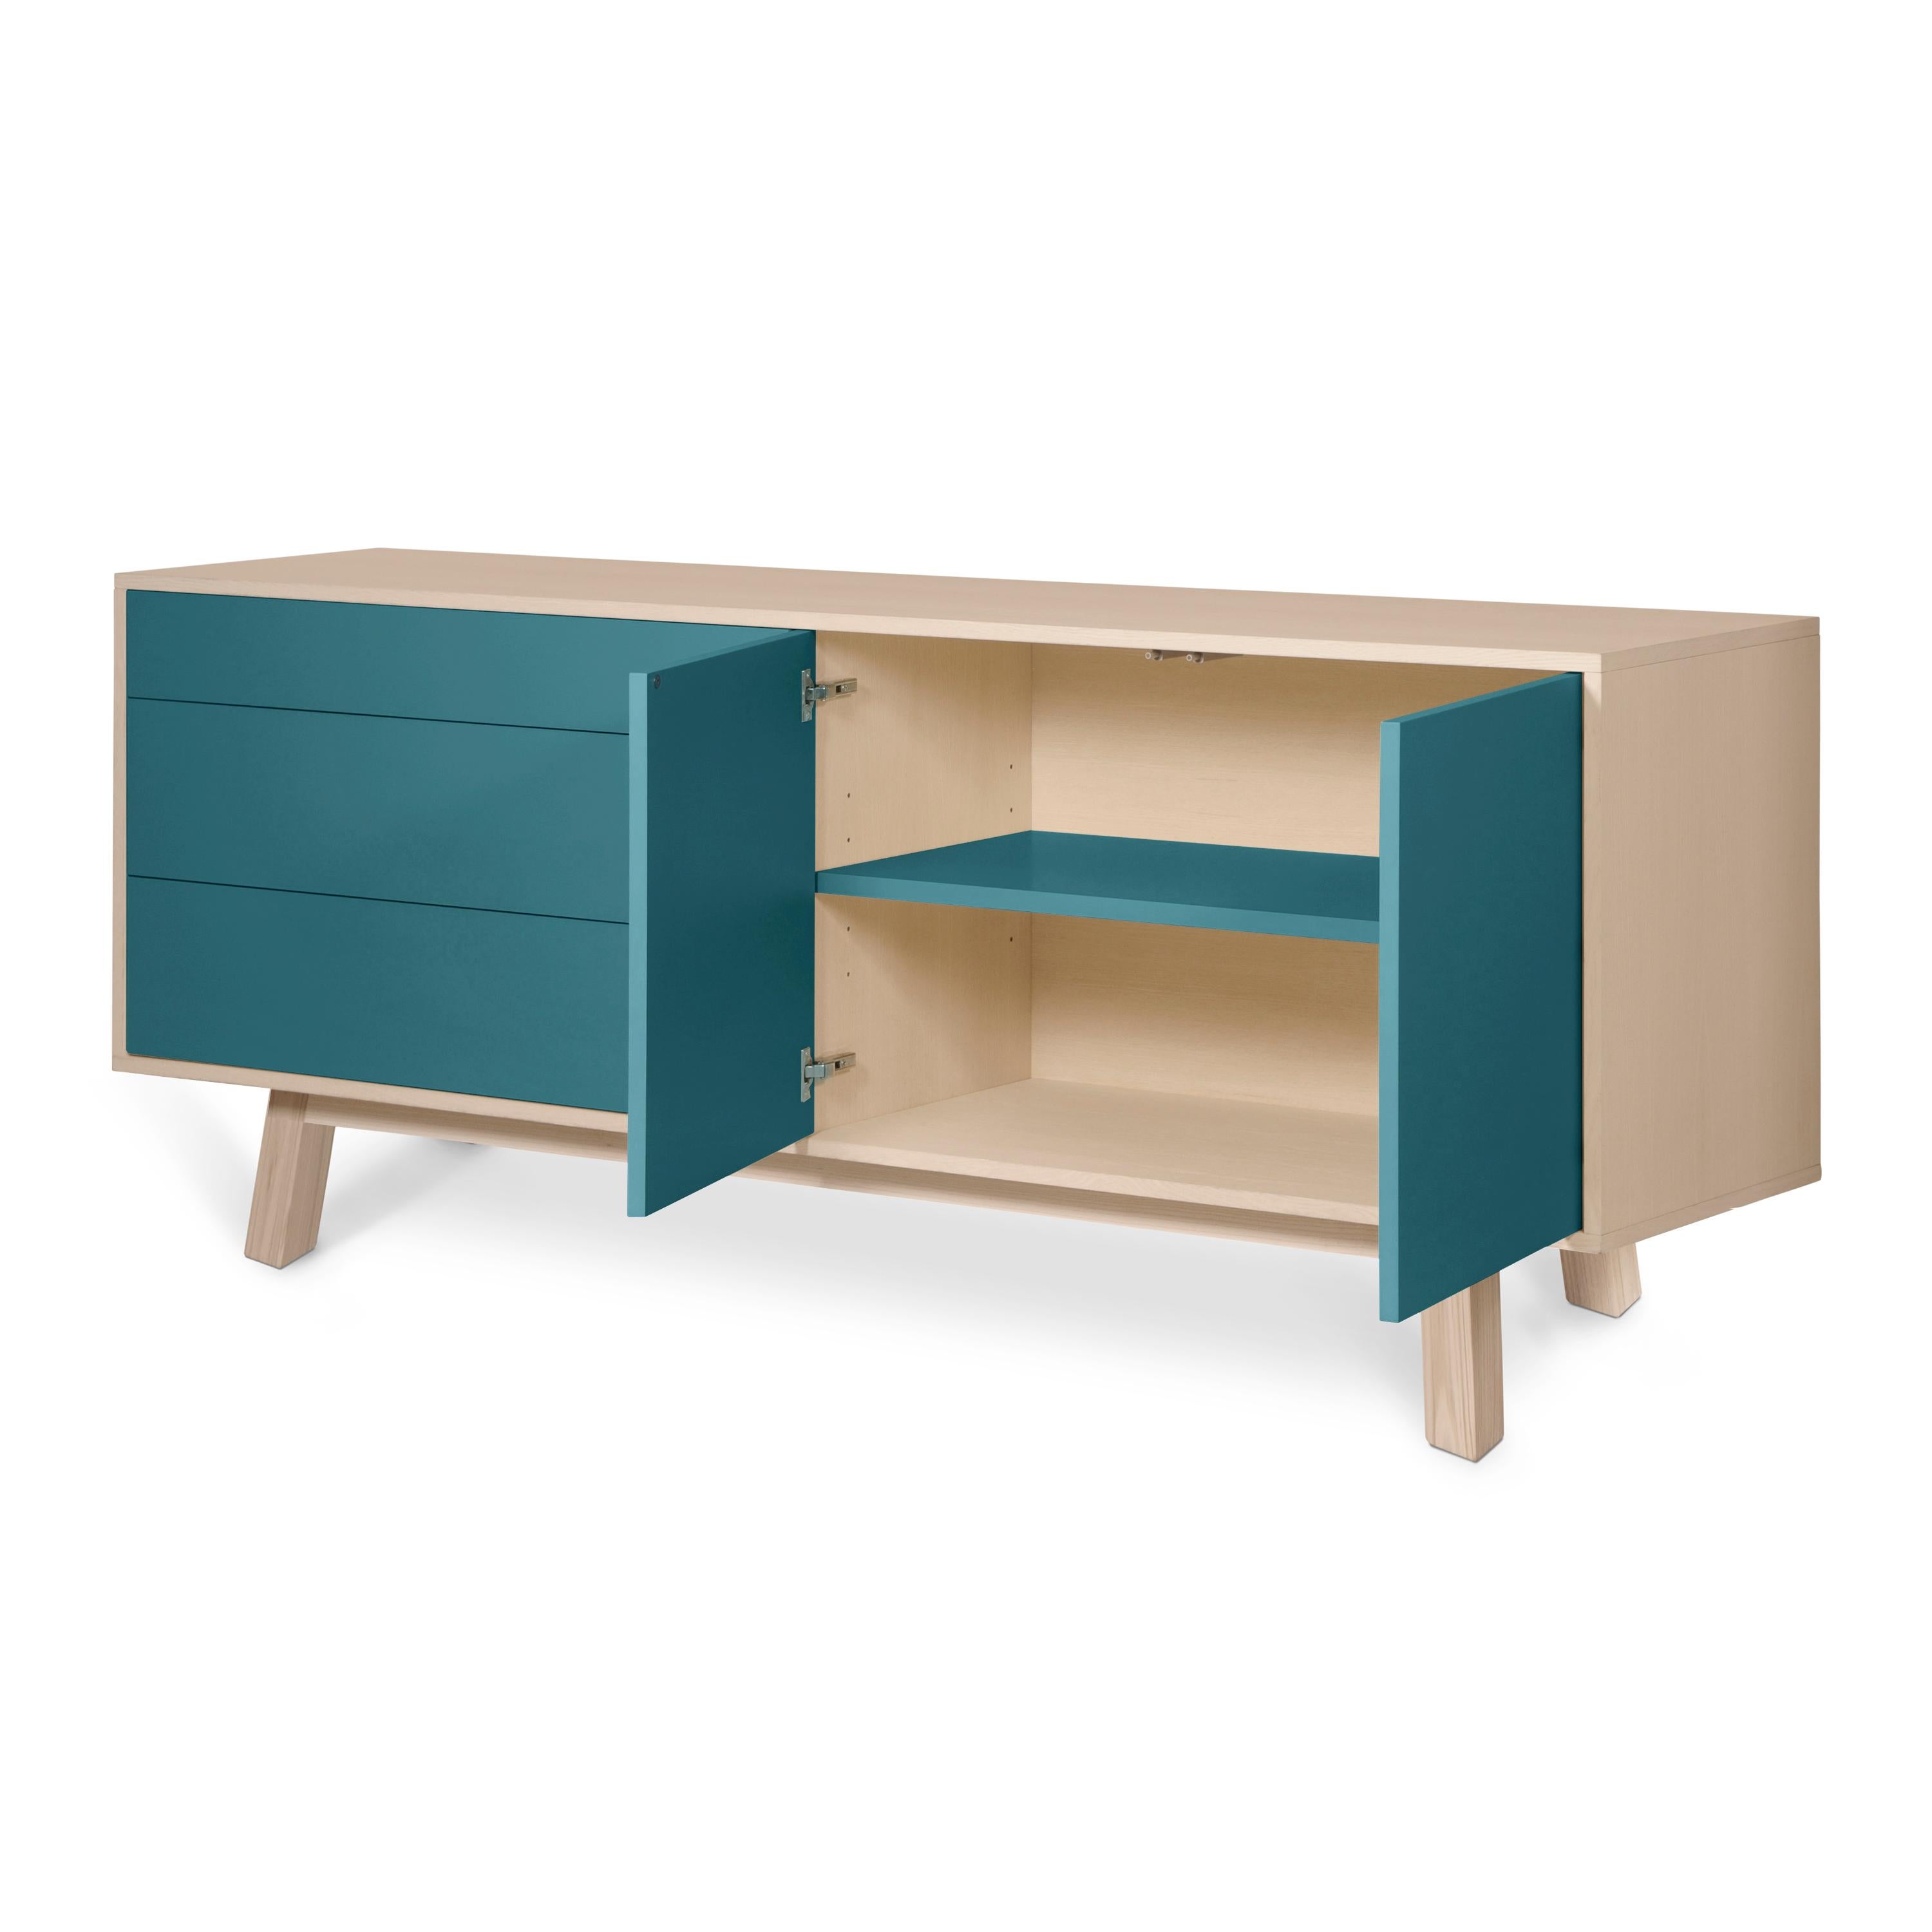 Sea Blue Sideboard, Scandinavian Design by Eric Gizard in Paris, French Craft In New Condition For Sale In Landivy, FR